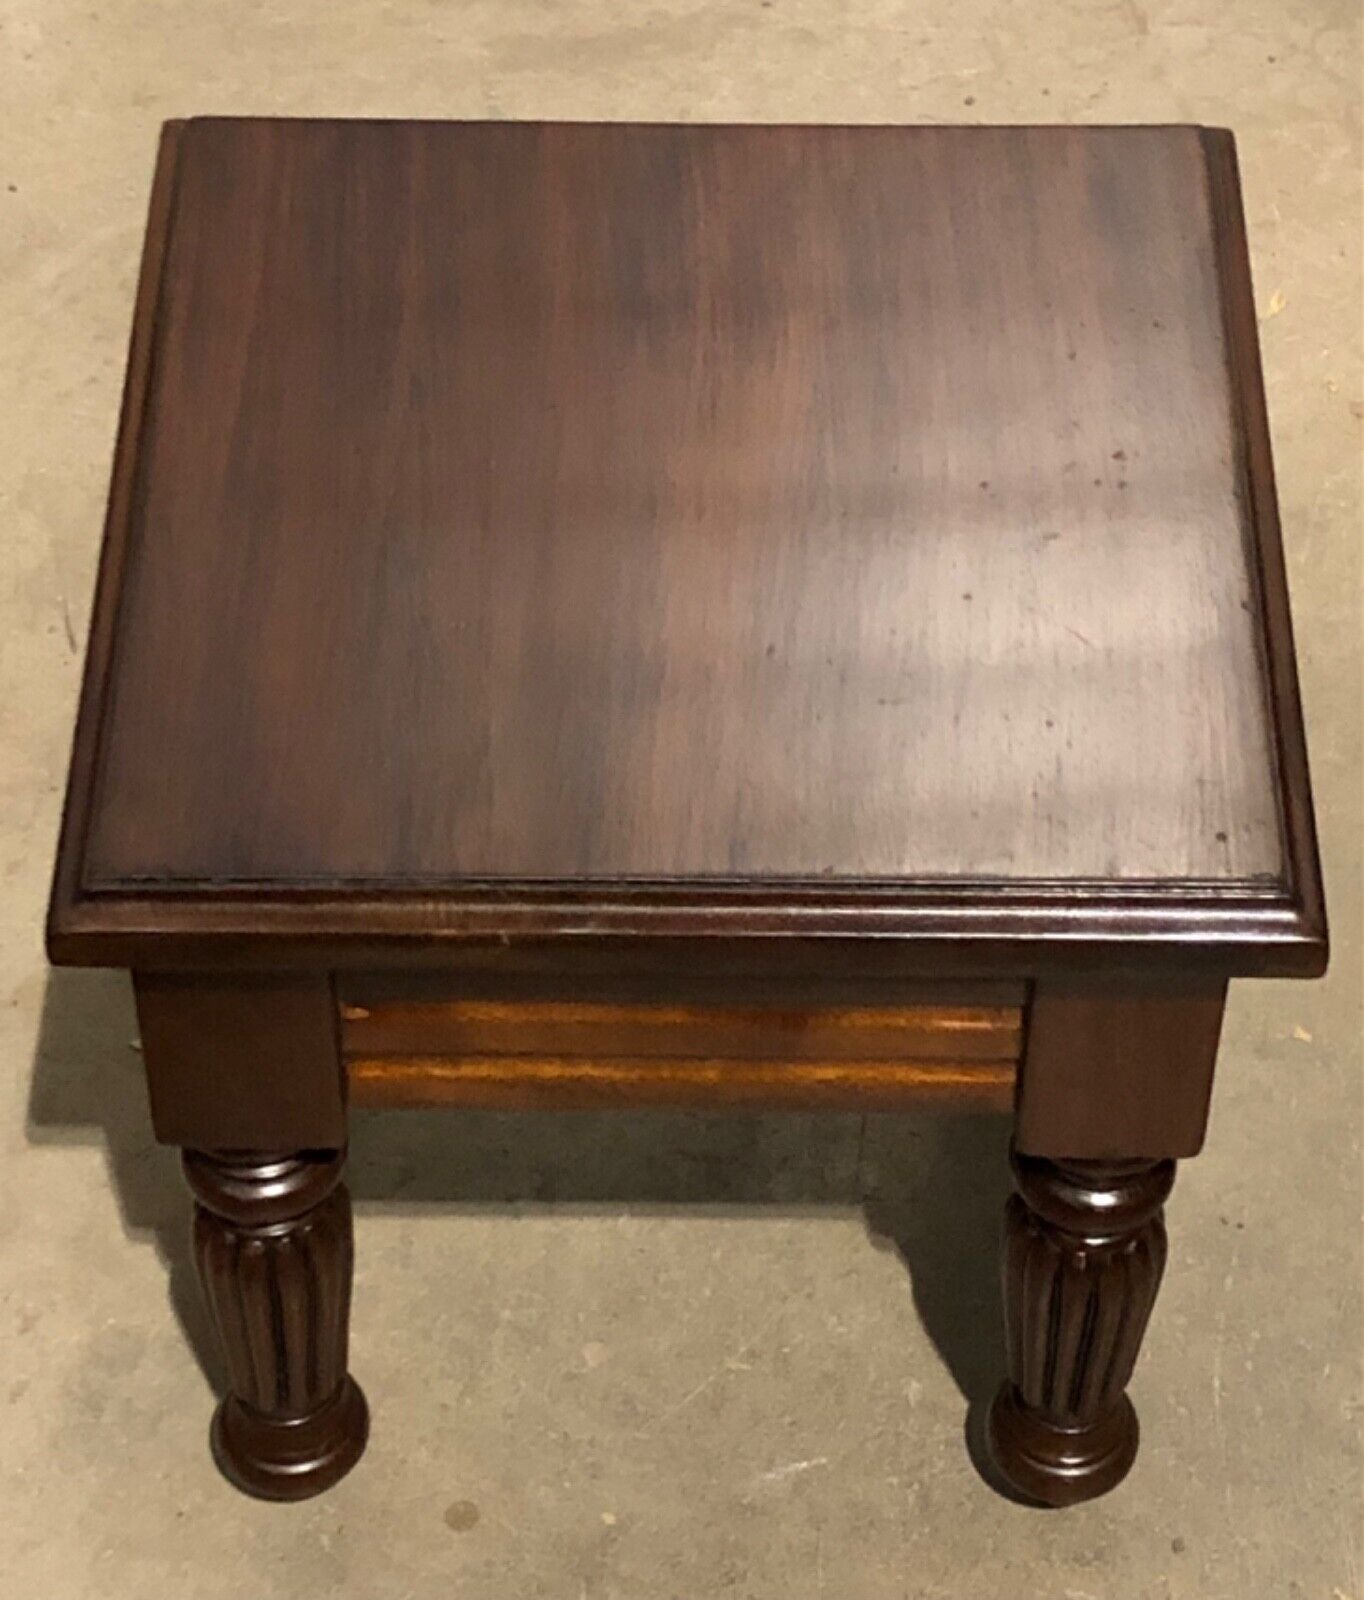 000754....Handsome Vintage Mahogany Nest Of Tables / Coffee Tables ( sold )